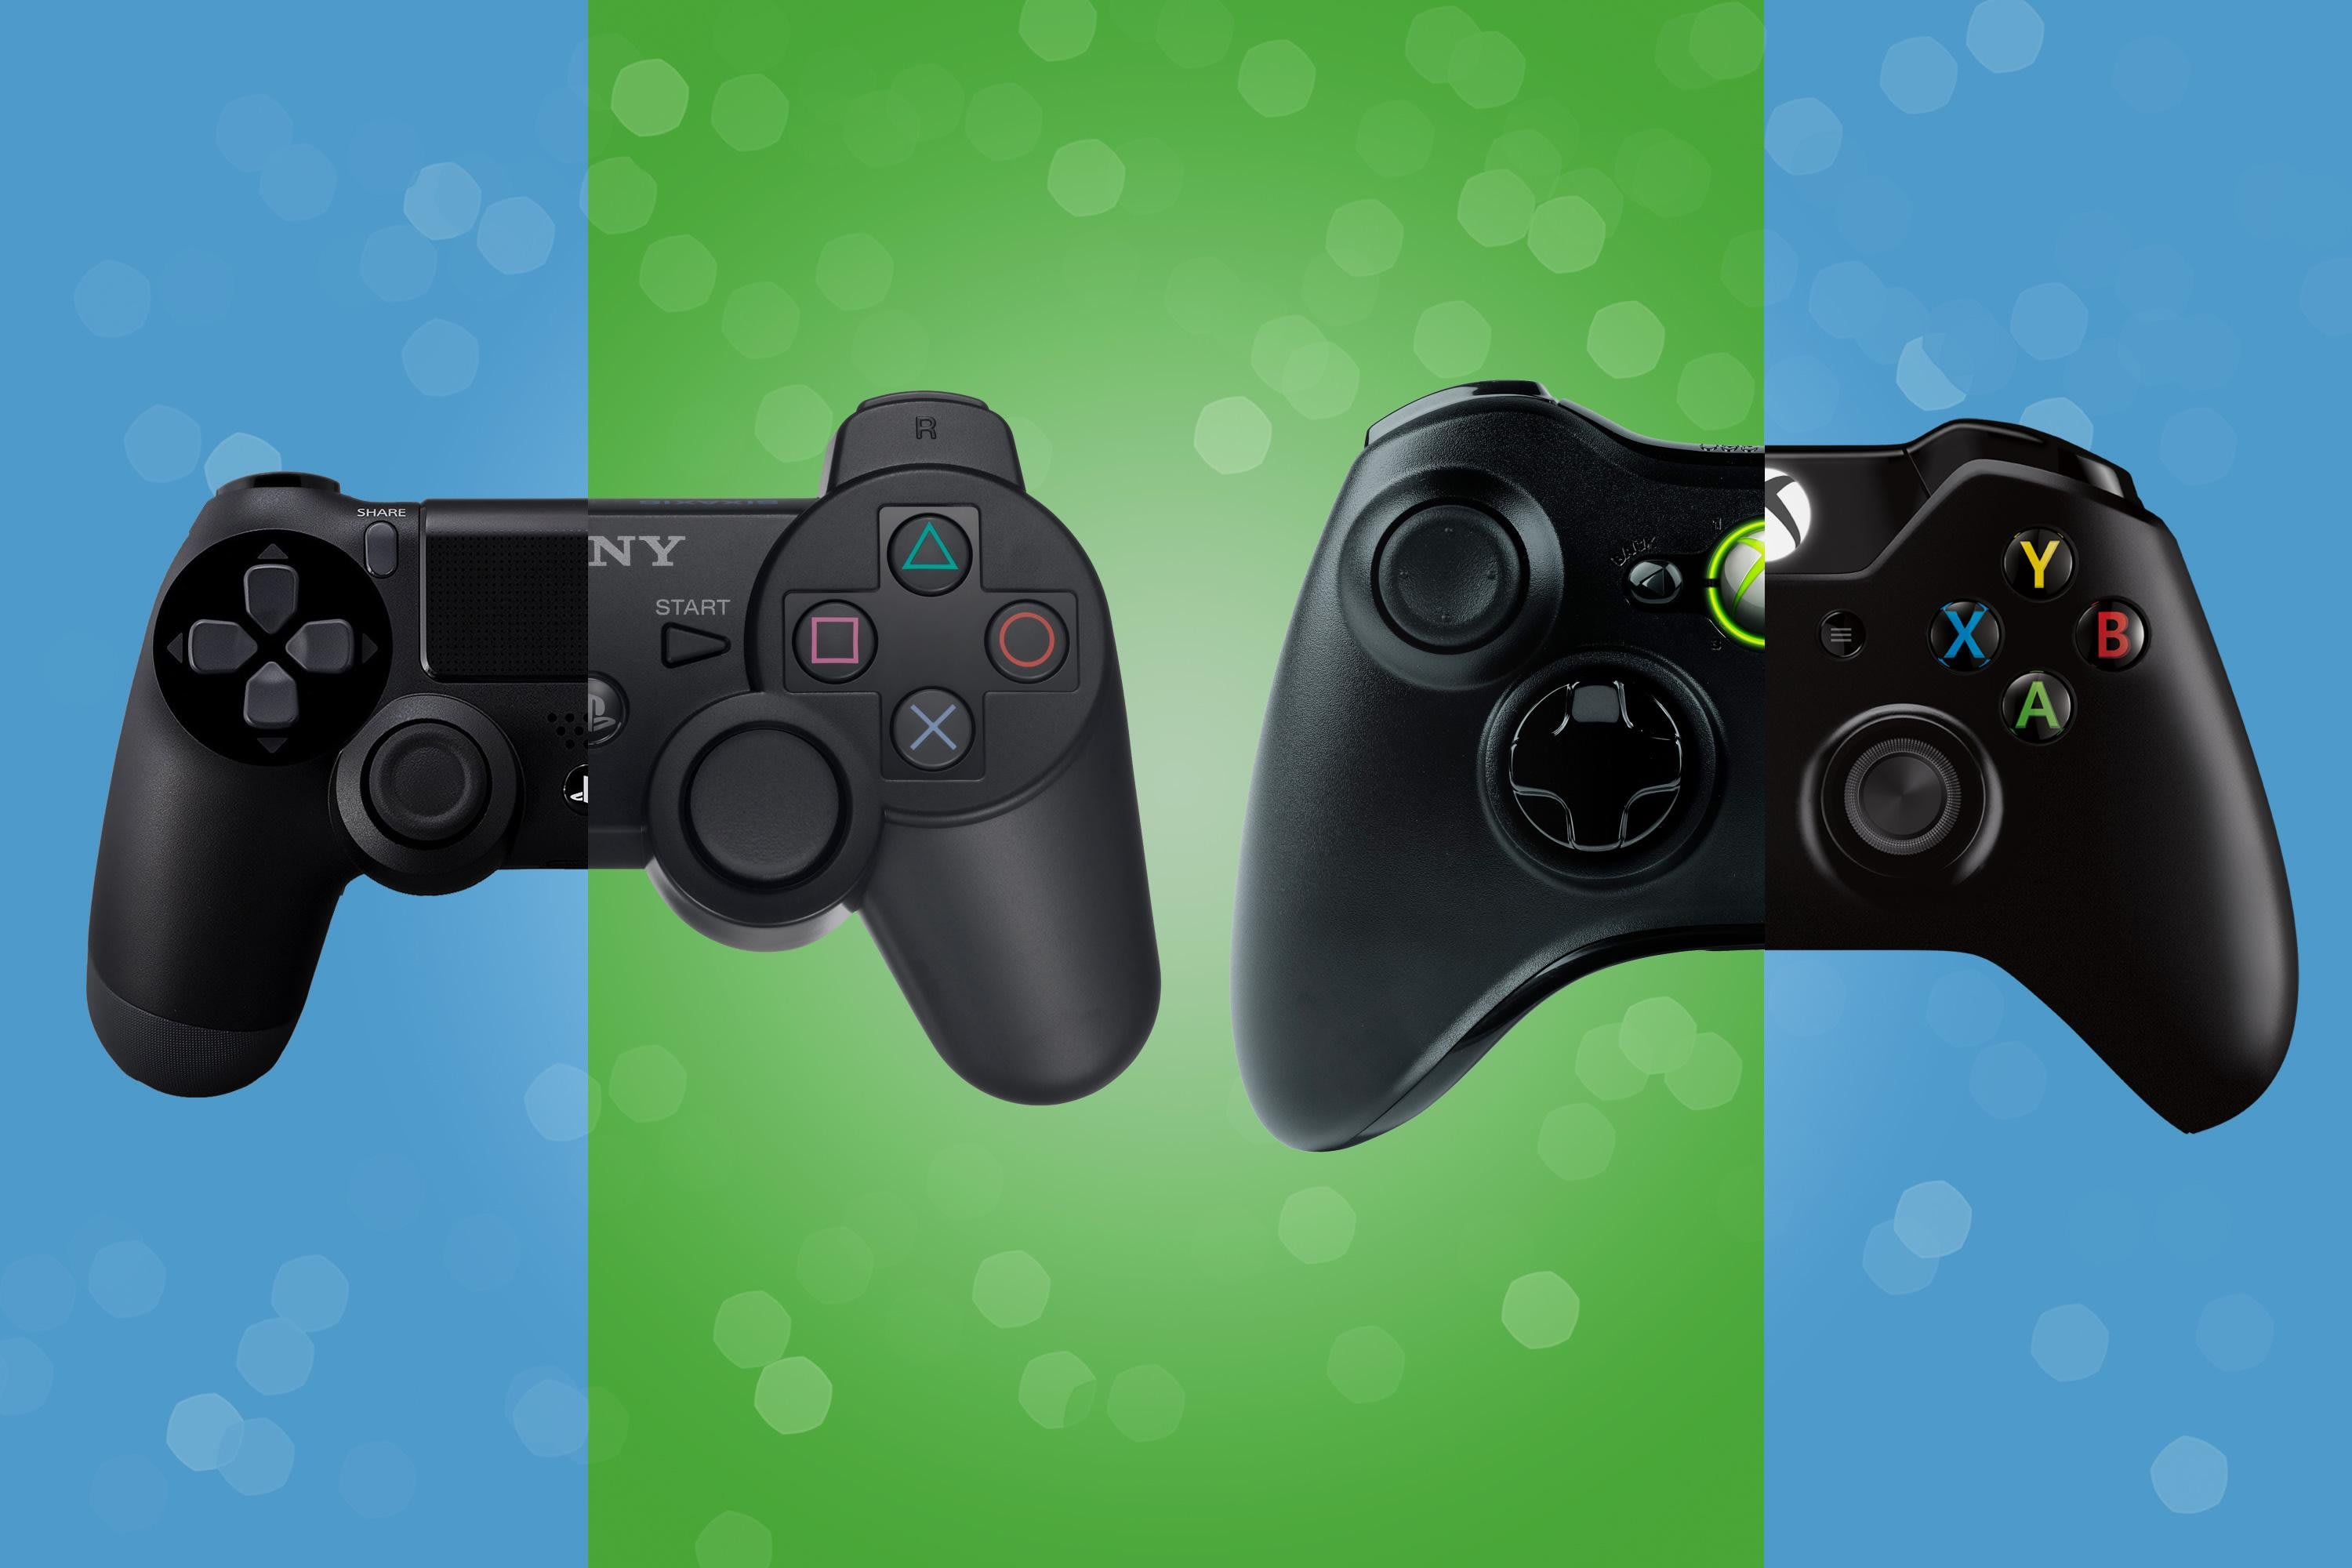 It's not too late to buy an Xbox 360 or PS3